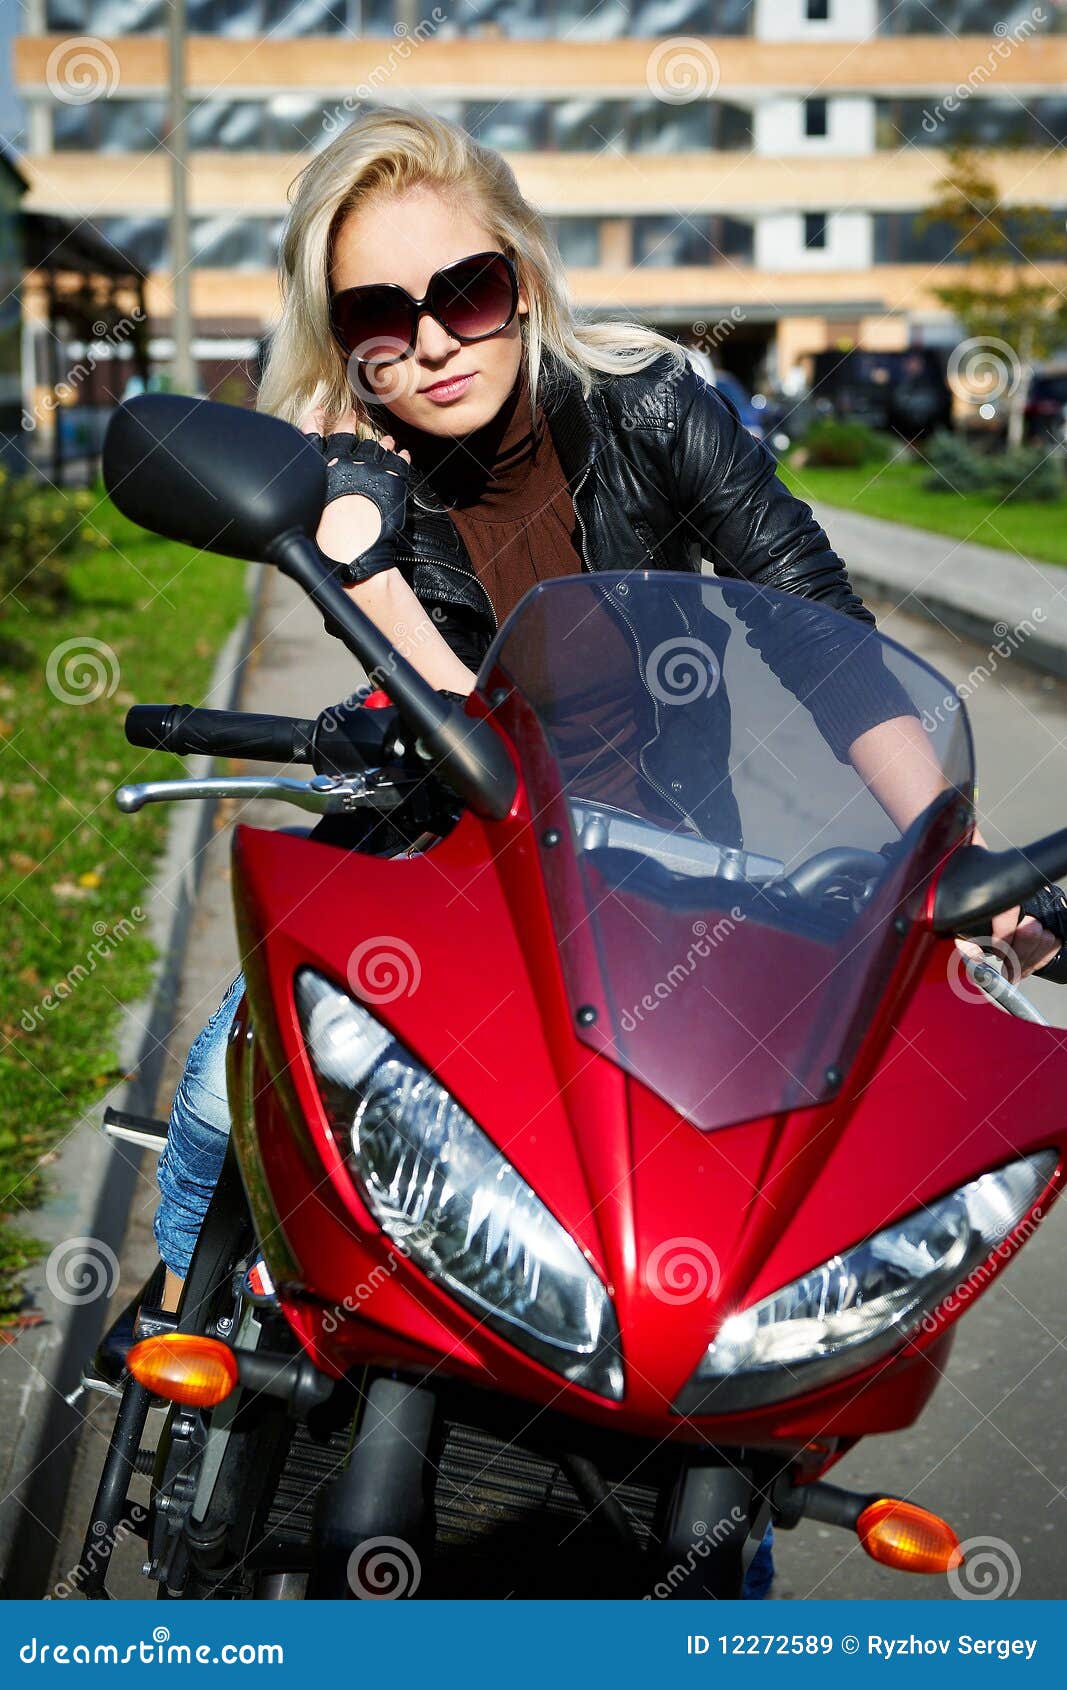 The Girl Blonde Sg on Red Motorcycle Stock Image - Image of motorcycle ...